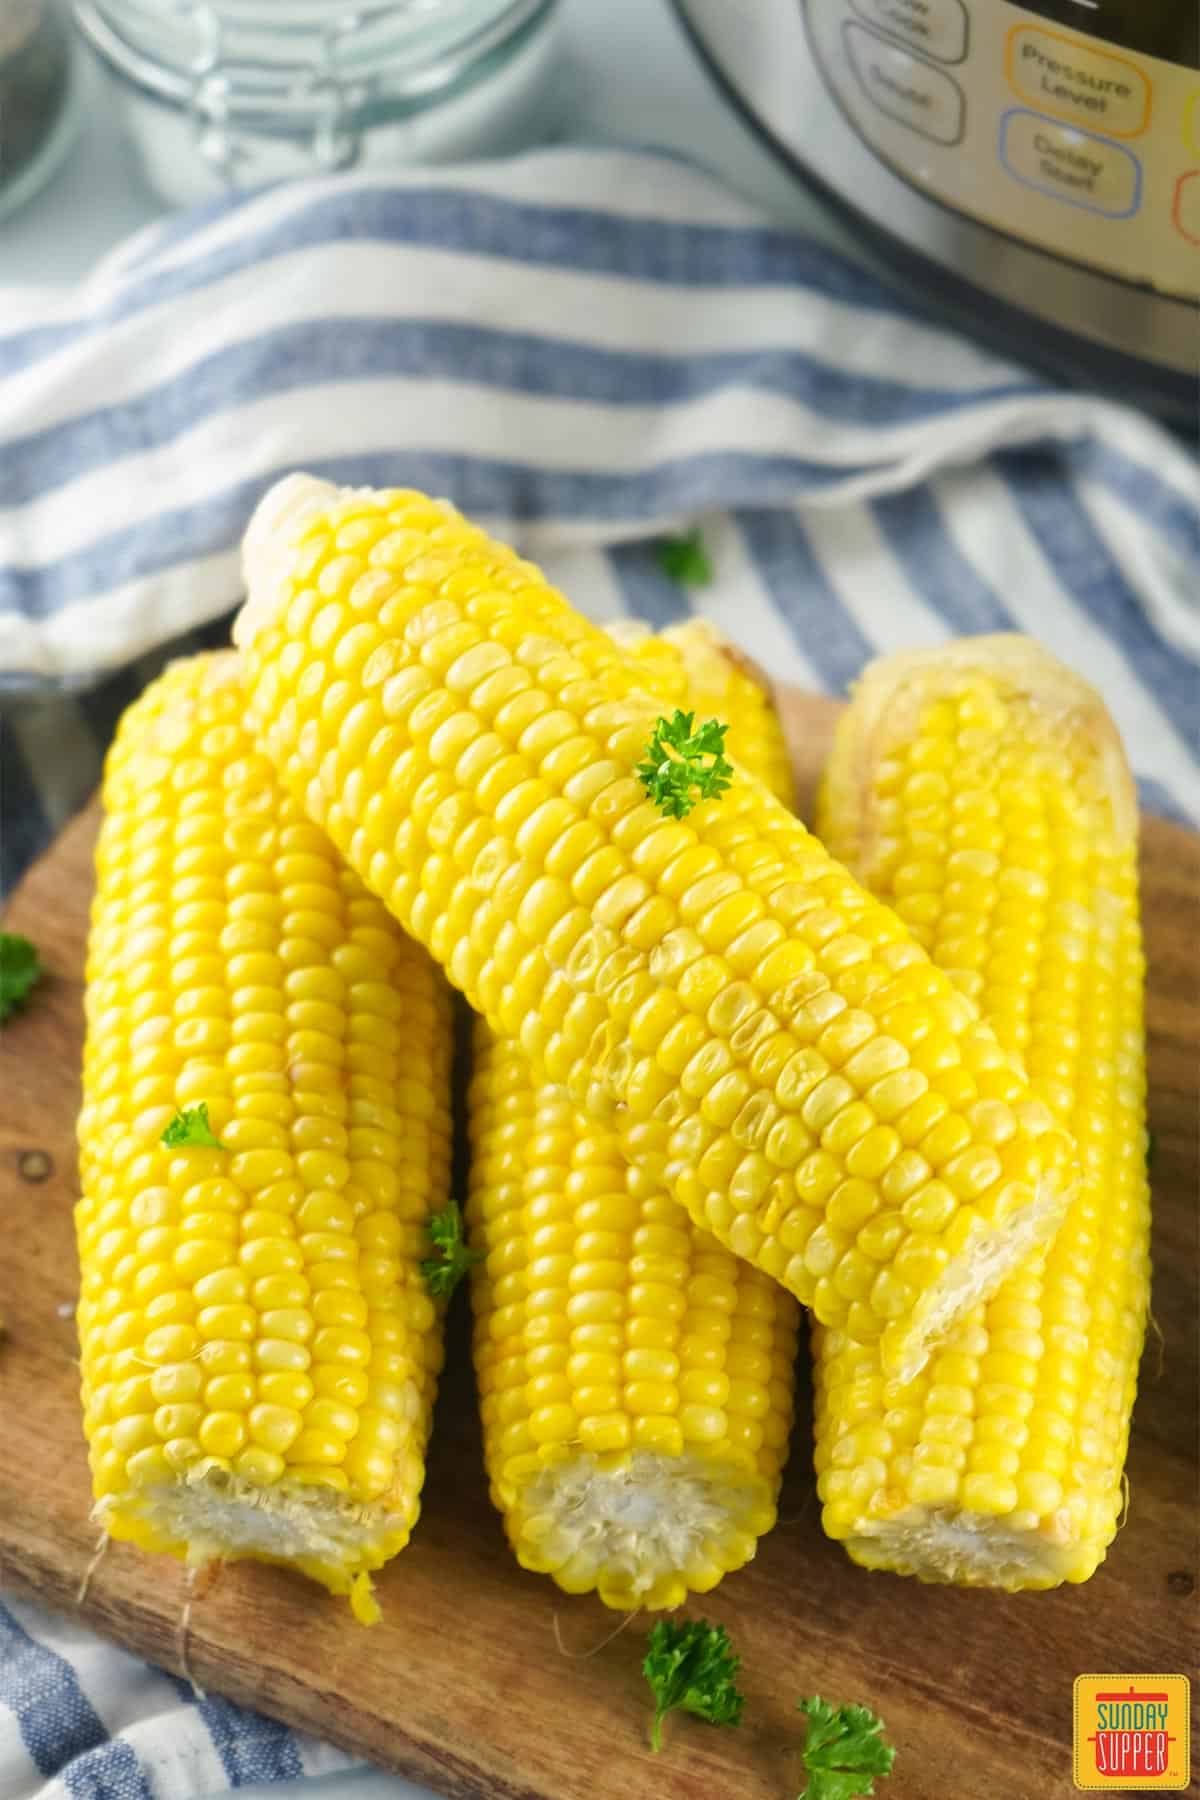 Corn on the cob on a wooden cutting board